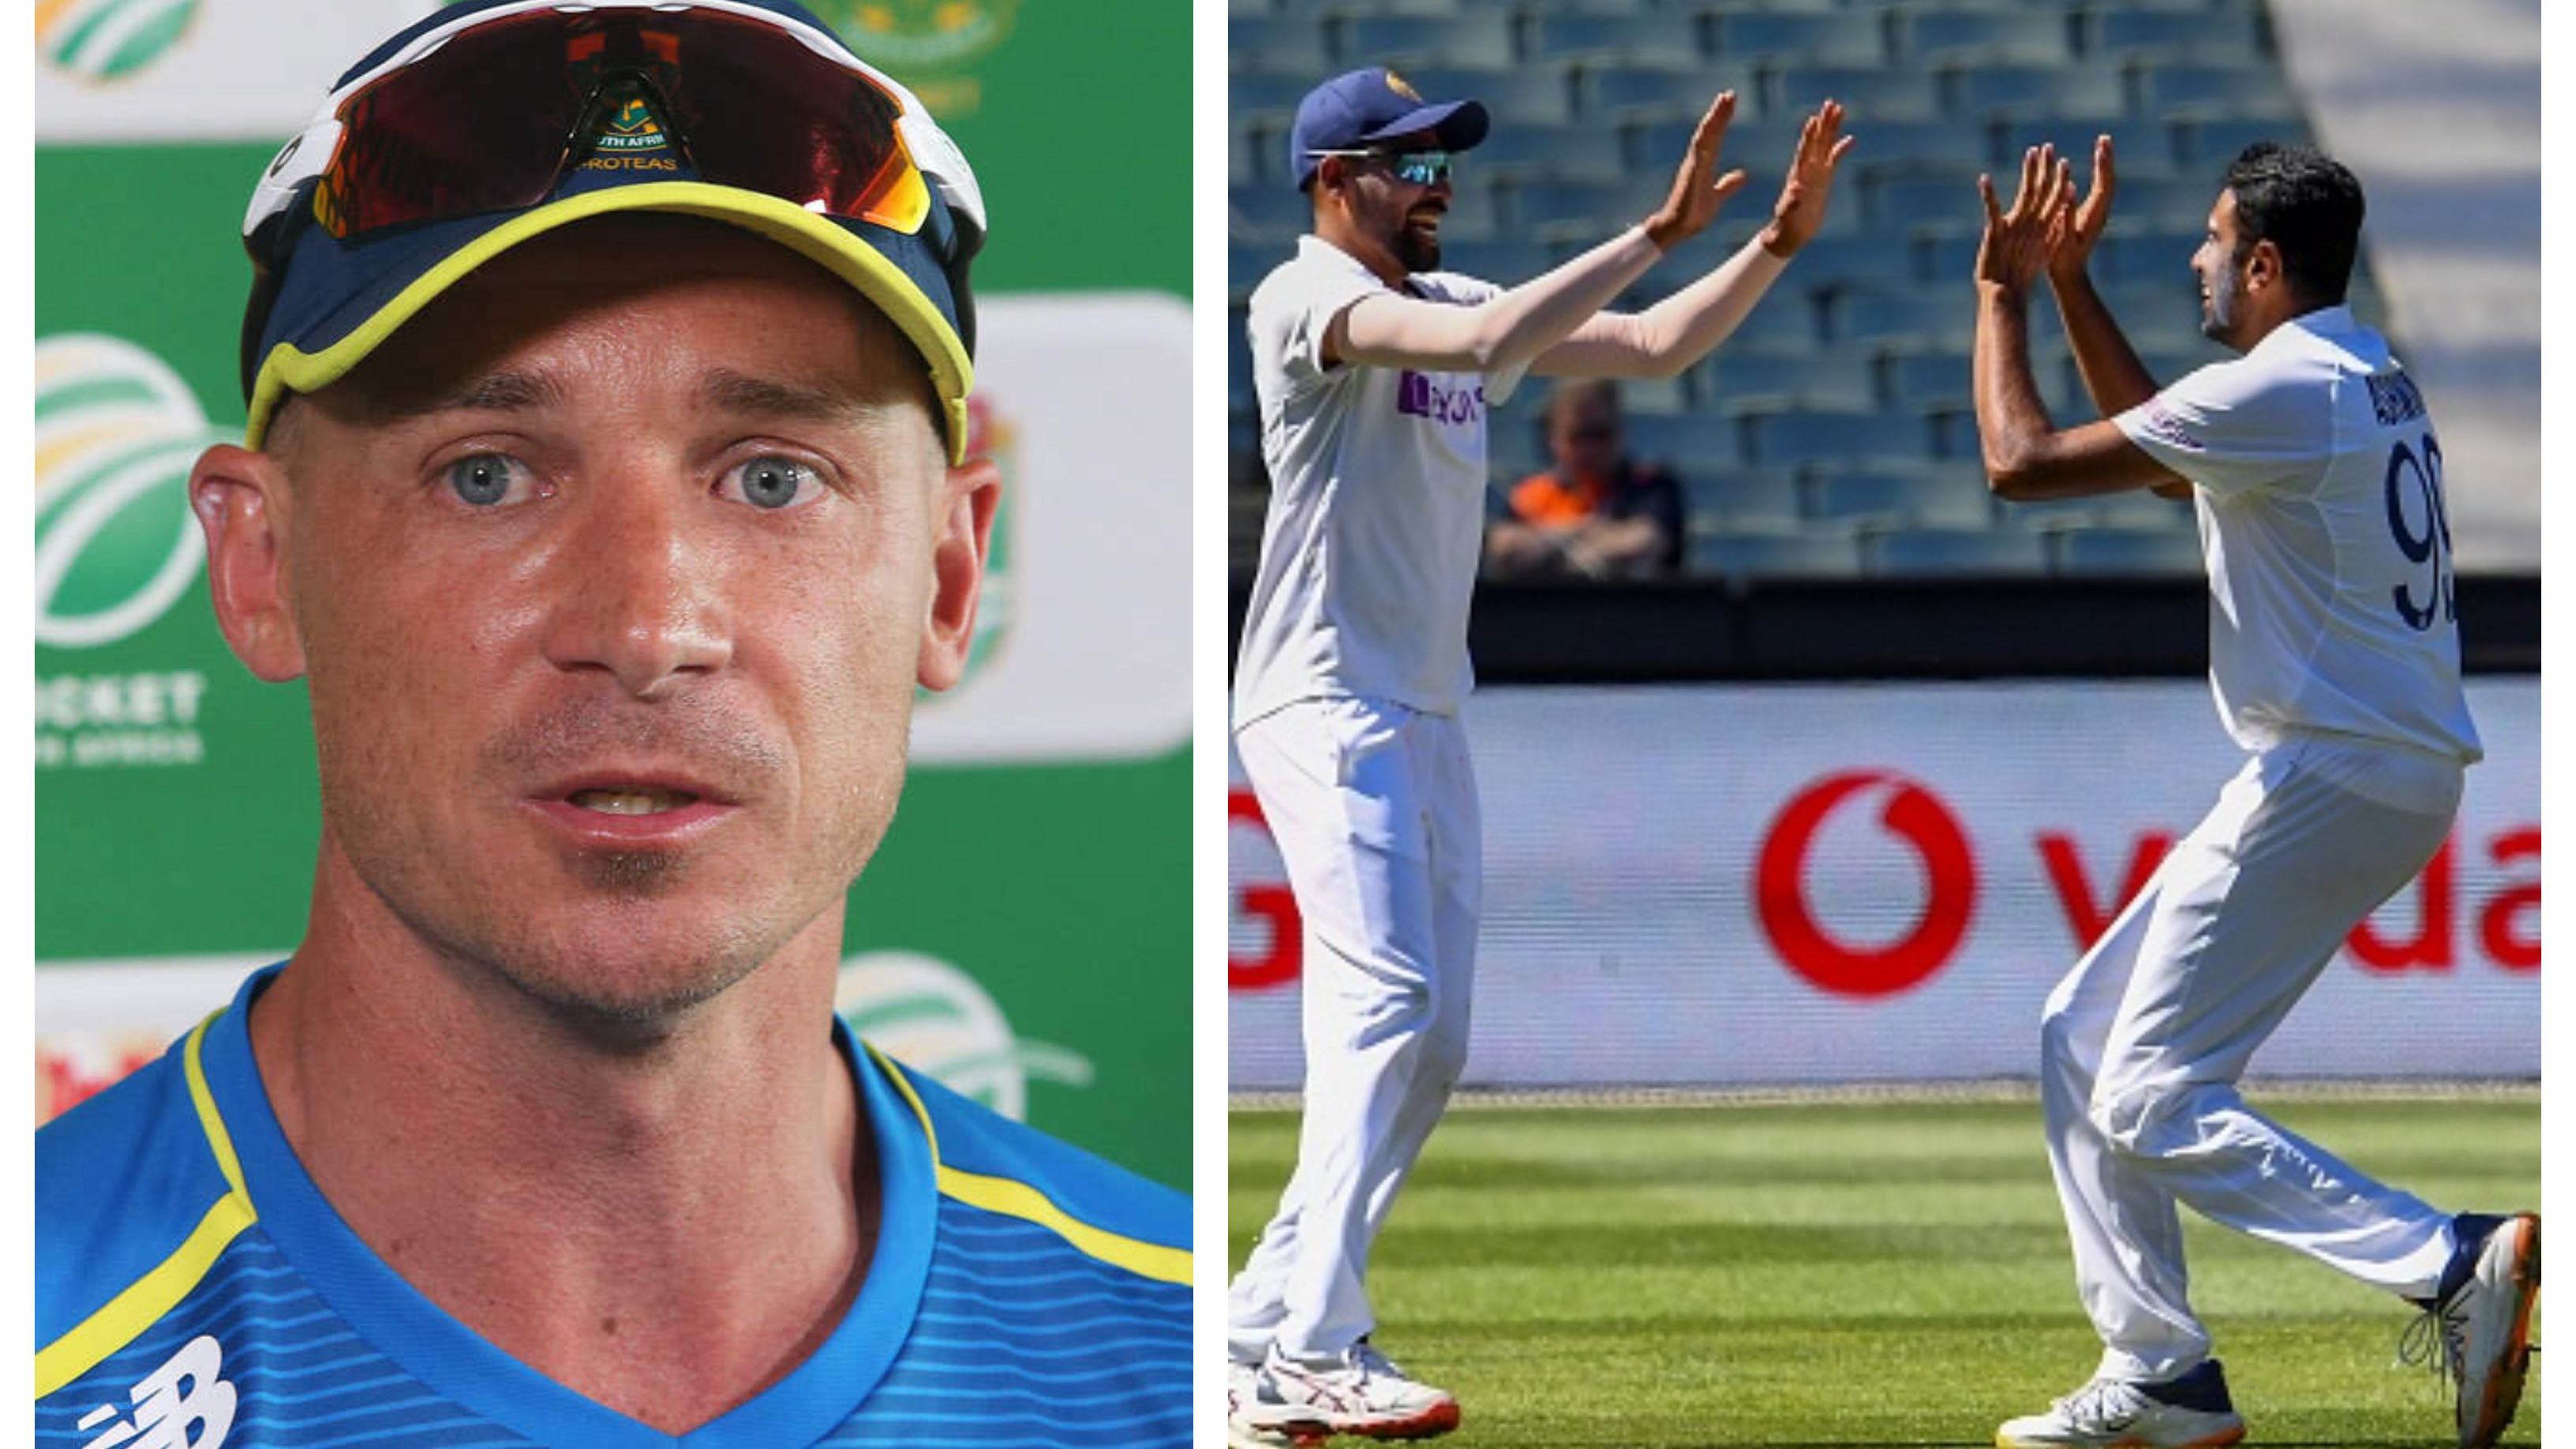 ENG v IND 2021: Dale Steyn weighs in over Team India’s bowling attack for the upcoming Test series